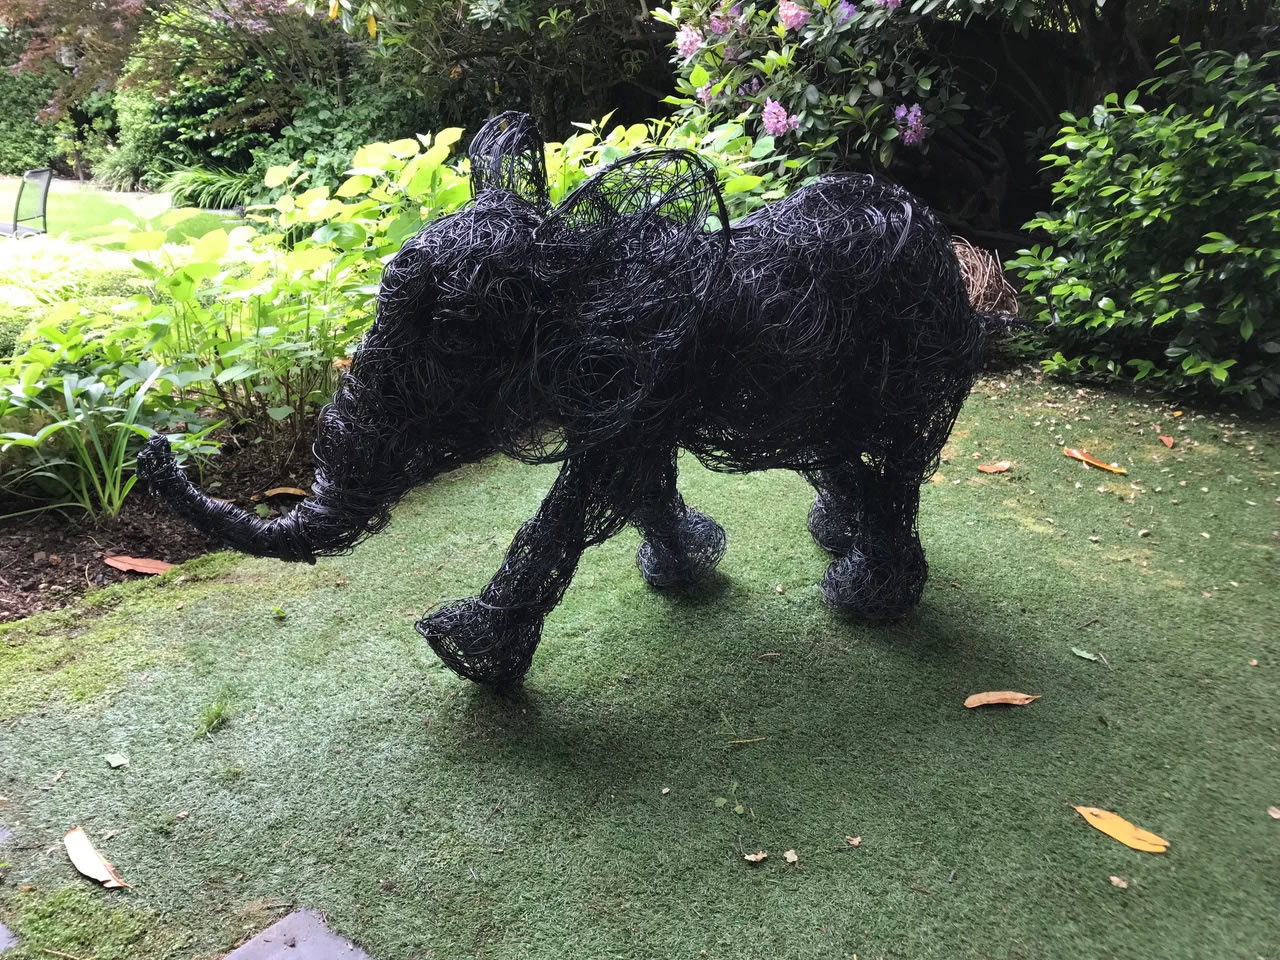 Jumbo, copper wire sculpture baby elephant seen at the 2018 Chelsea Flower Show installed in a garden in Hampstead, North London